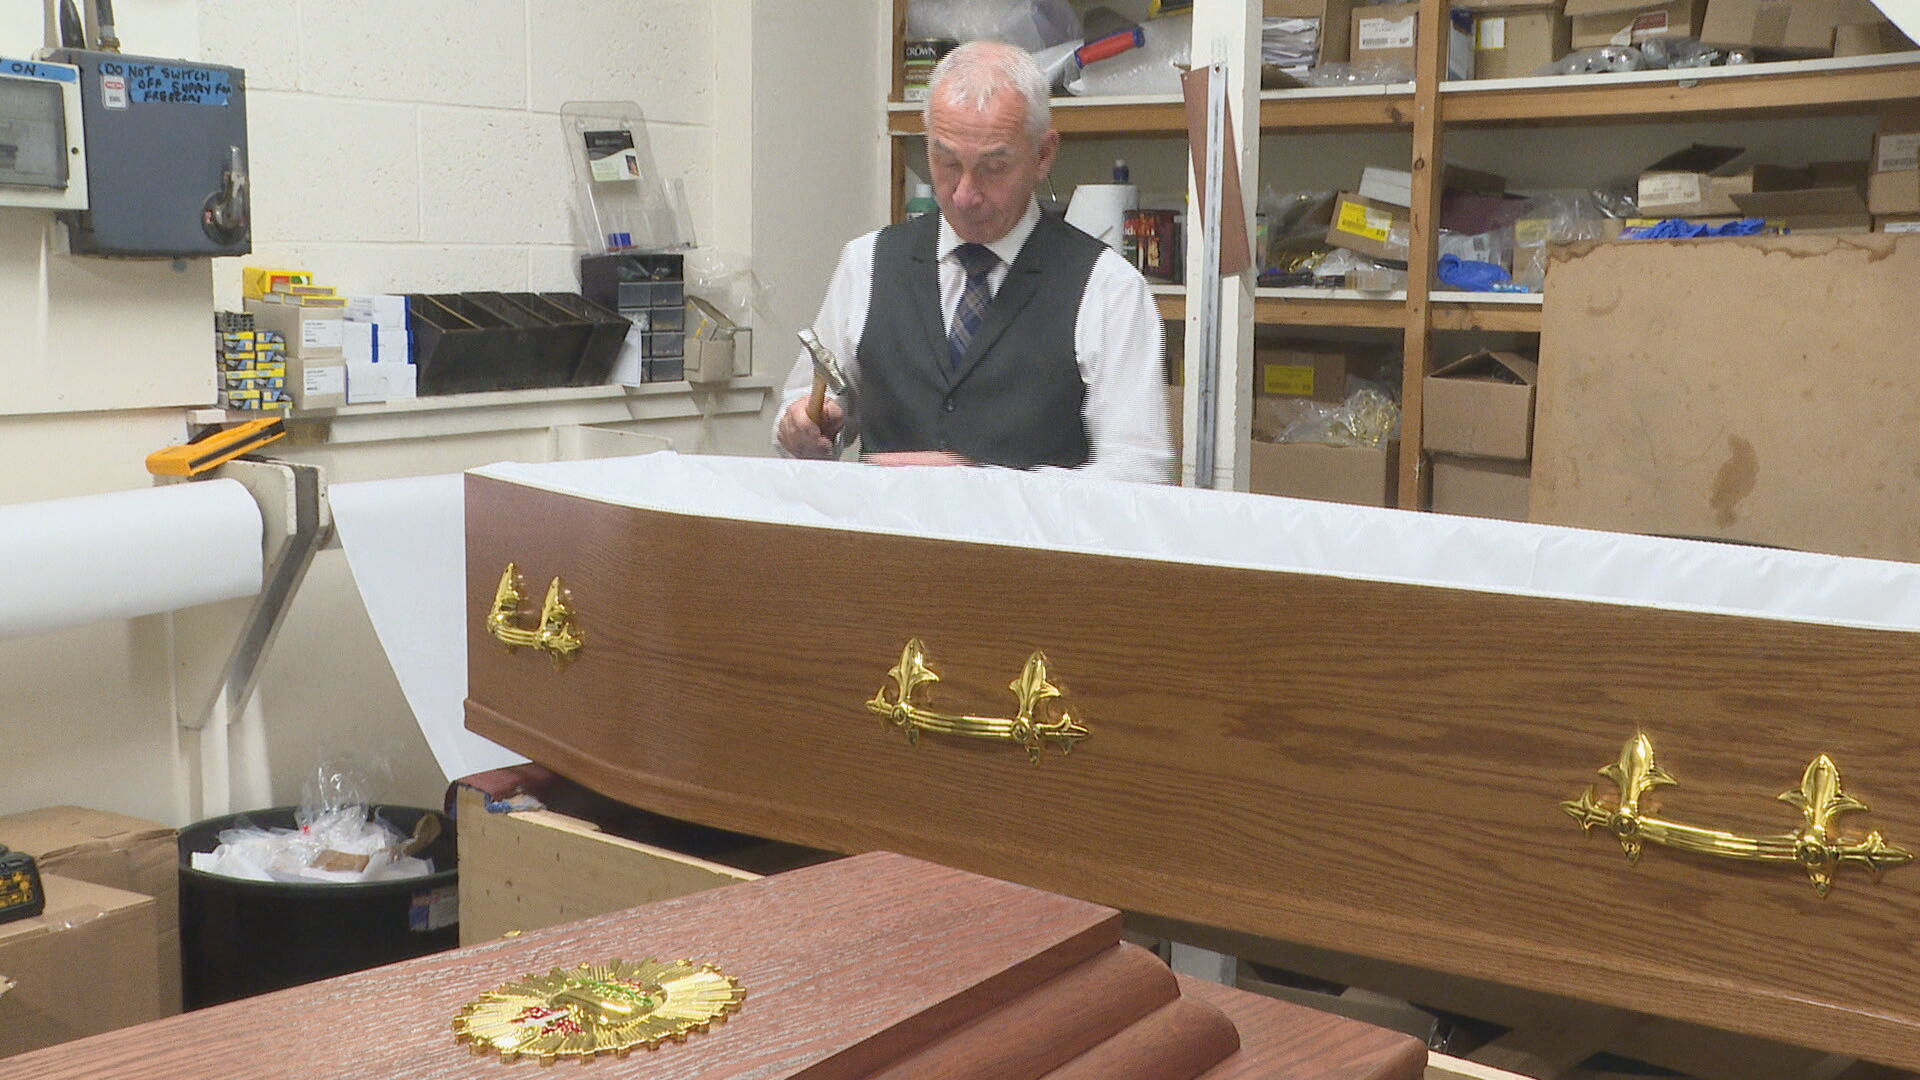 Basic costs are rising for funeral directors.